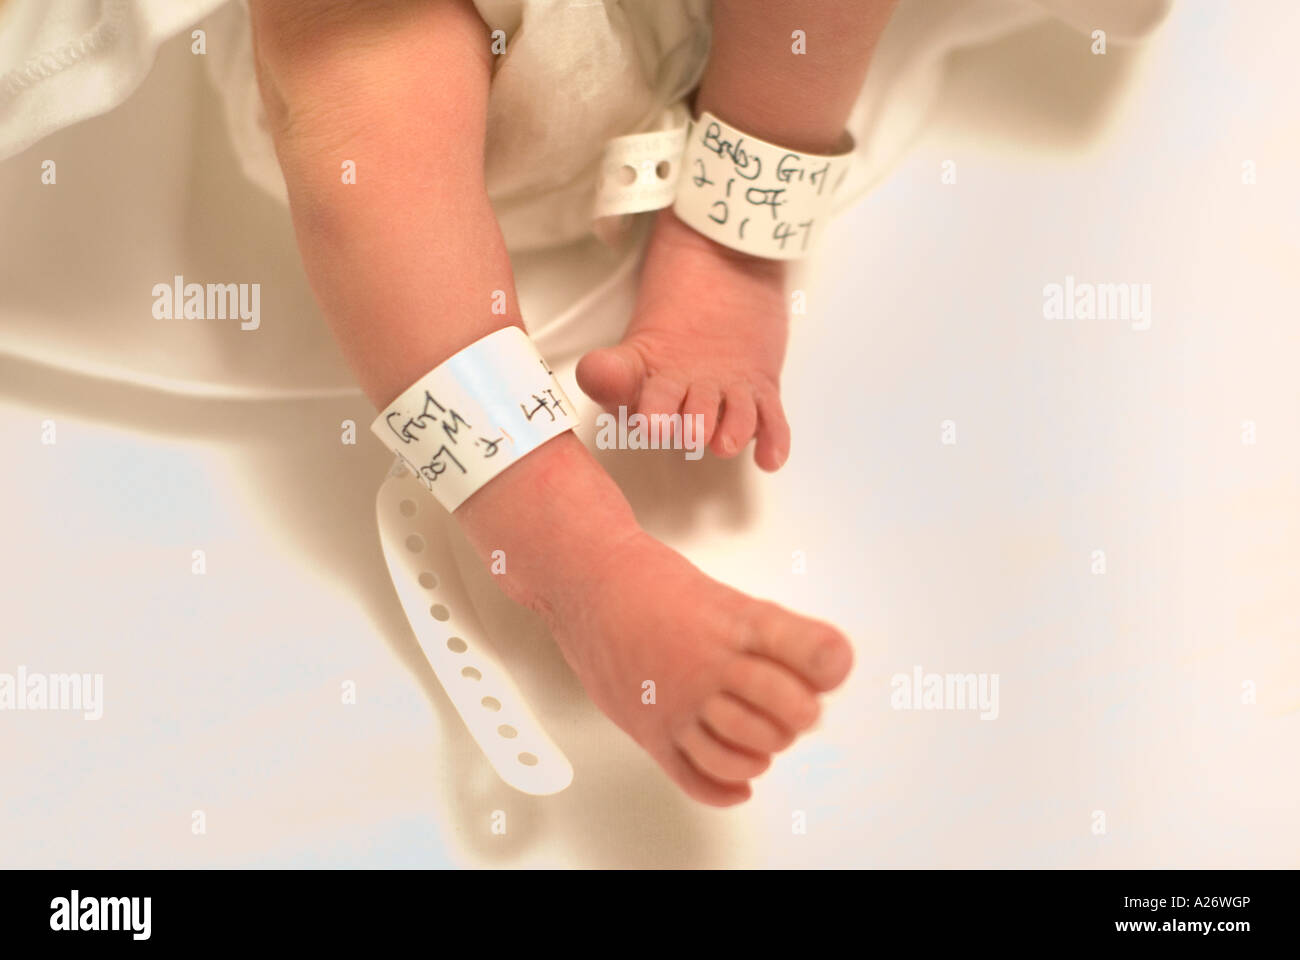 Detail of a newborn baby s feet with identification tag Postnatal labour ward Stock Photo